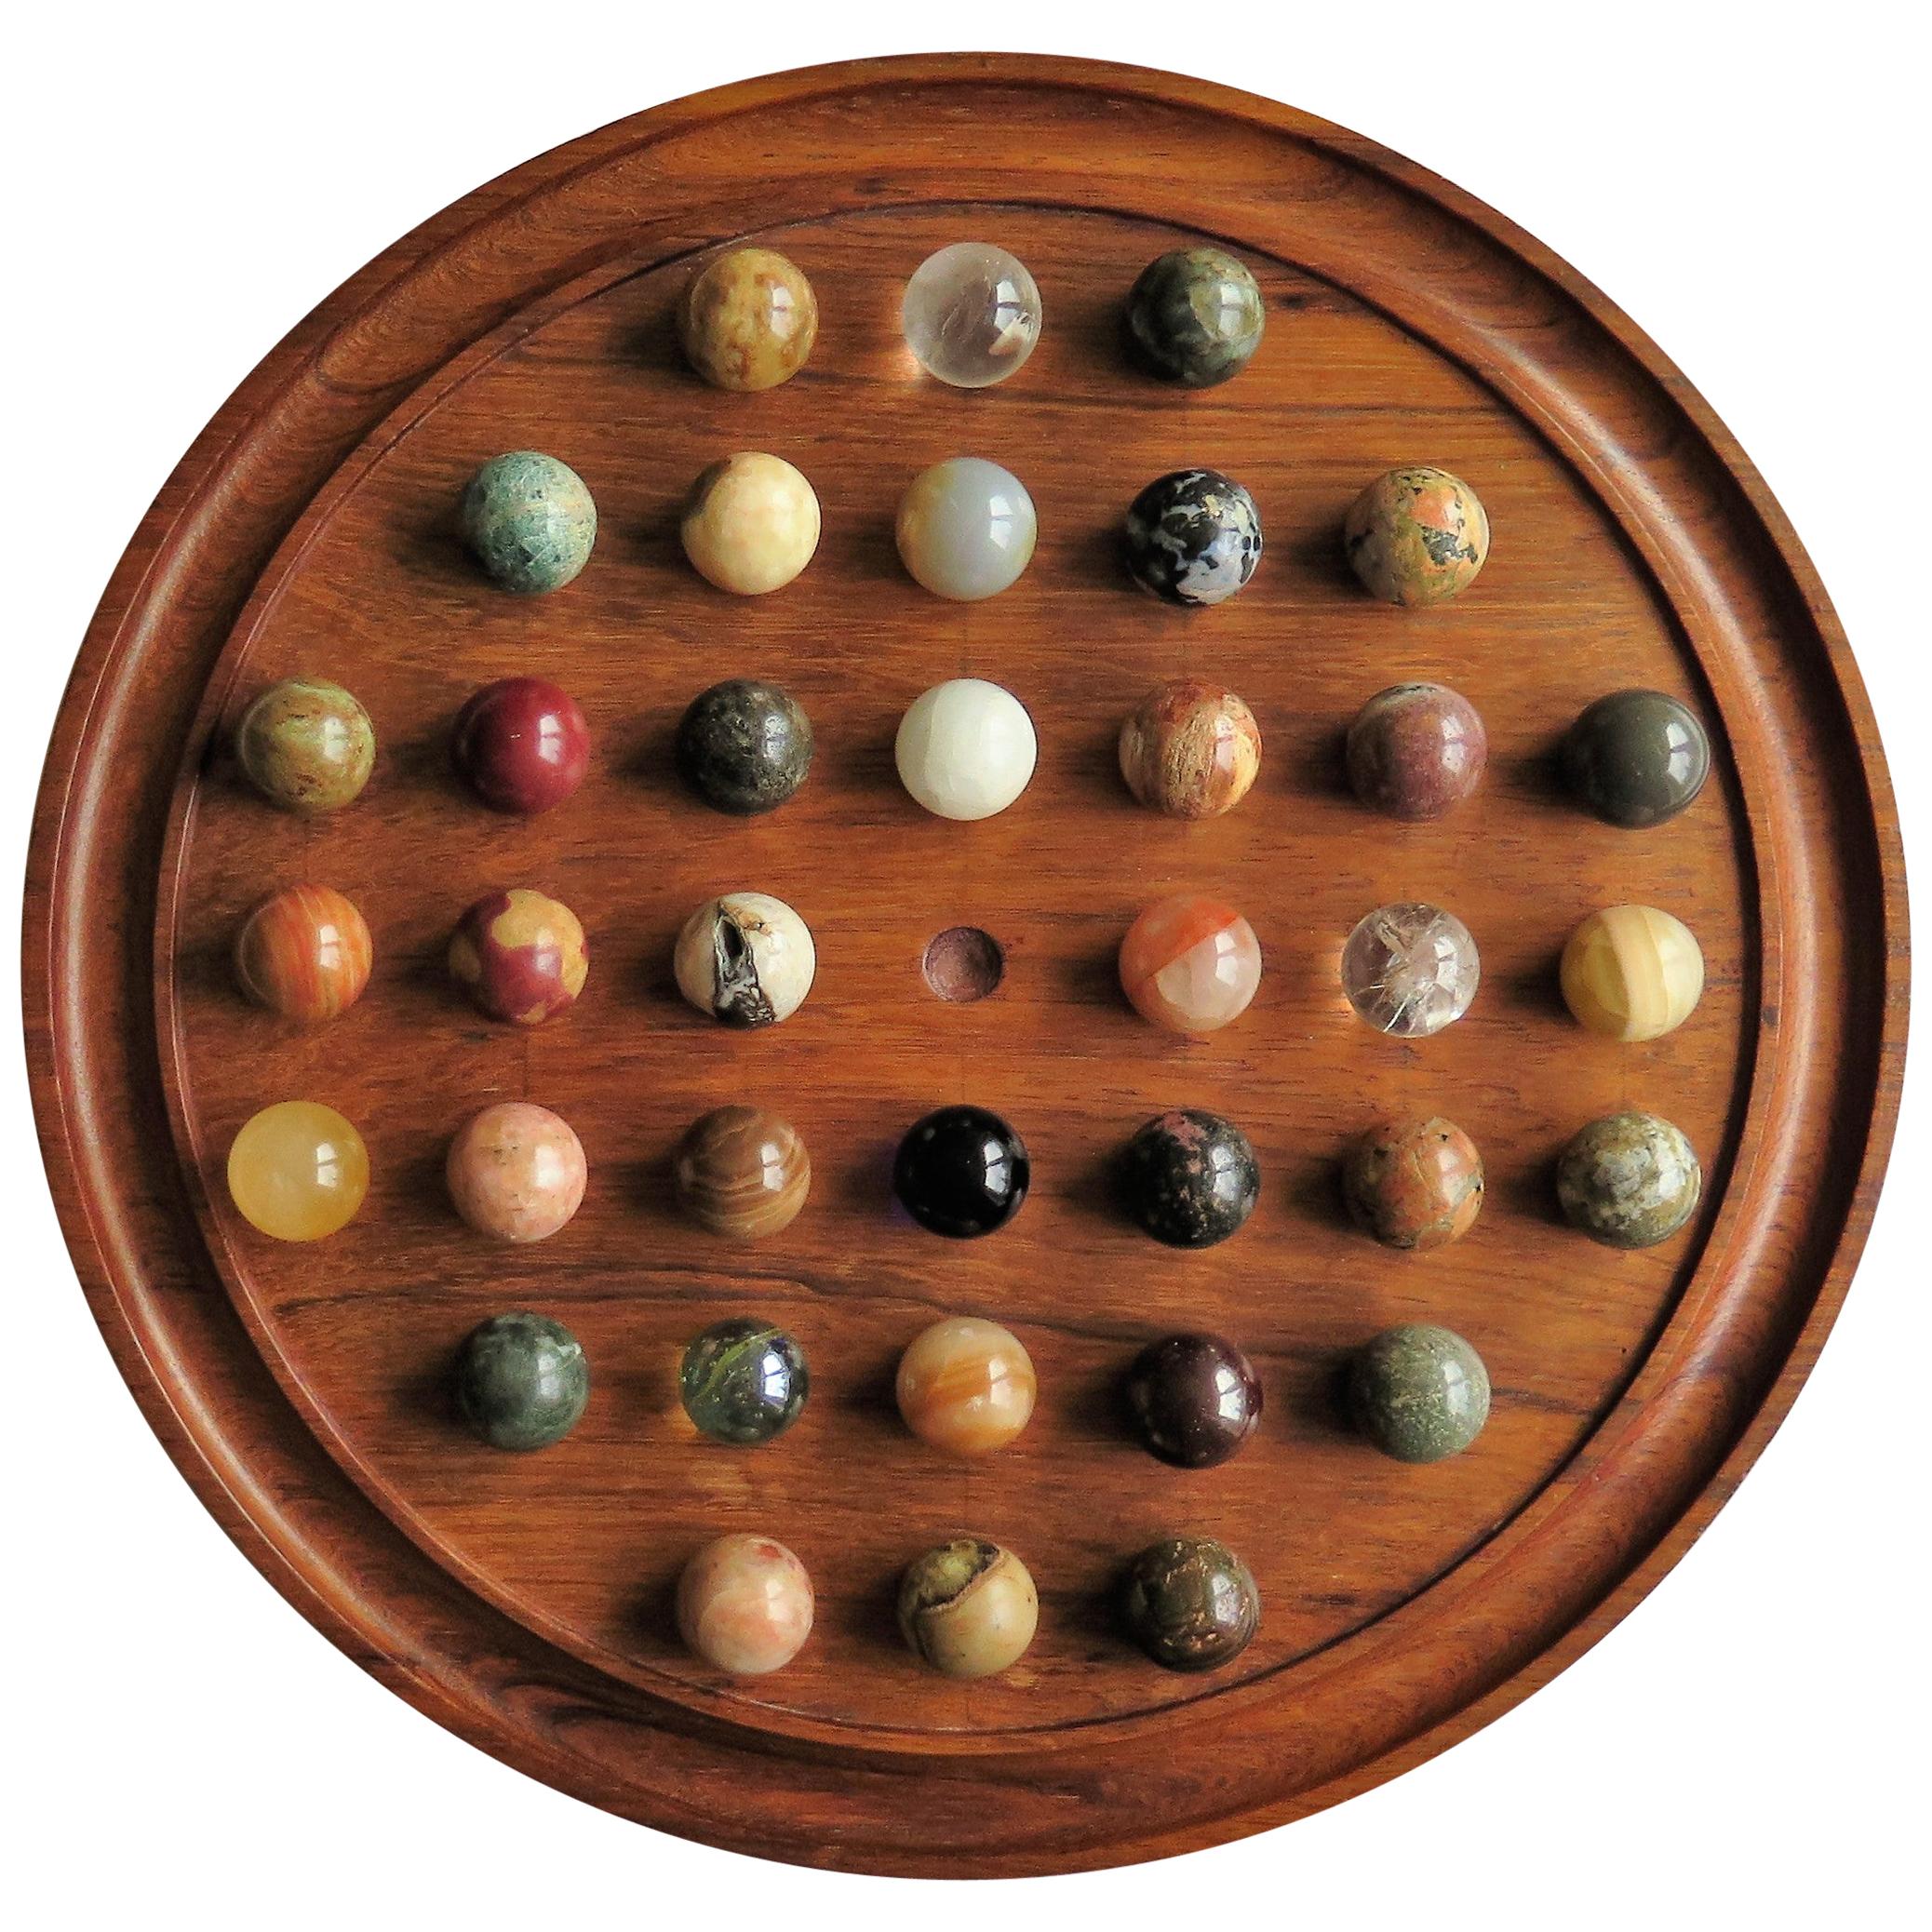 Fine Large Table Marble Solitaire Game with 36 Agate and Glass Marbles, French 